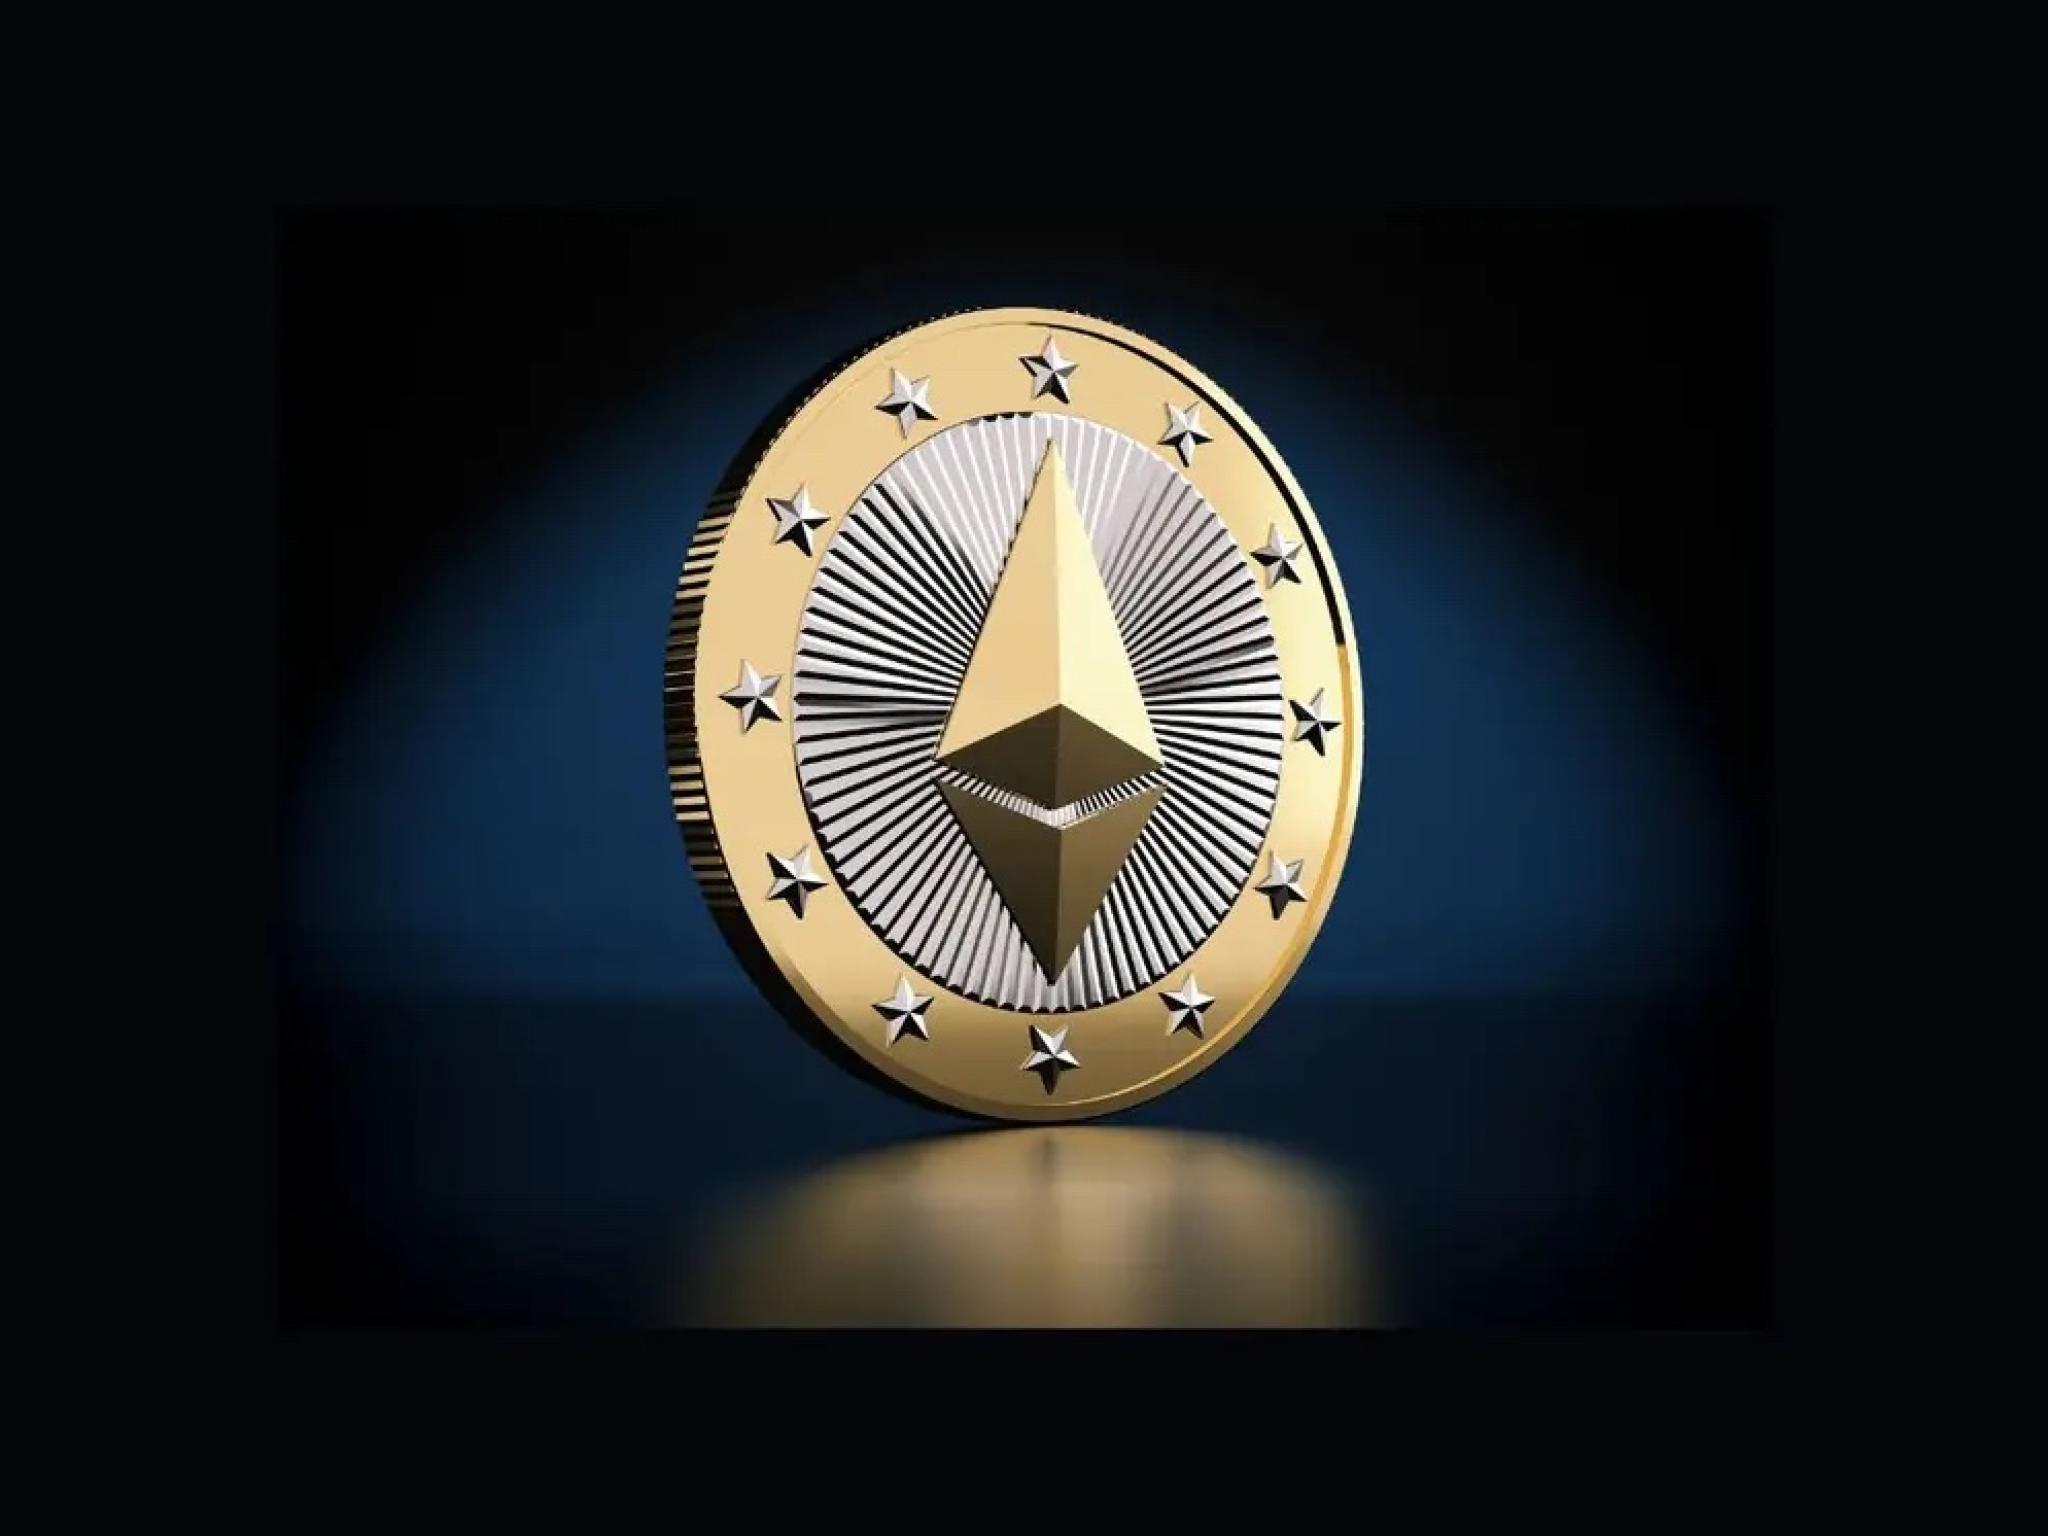  ethereum-rockets-to-3200-next-areas-up-are-3500-and-4000-says-analyst 